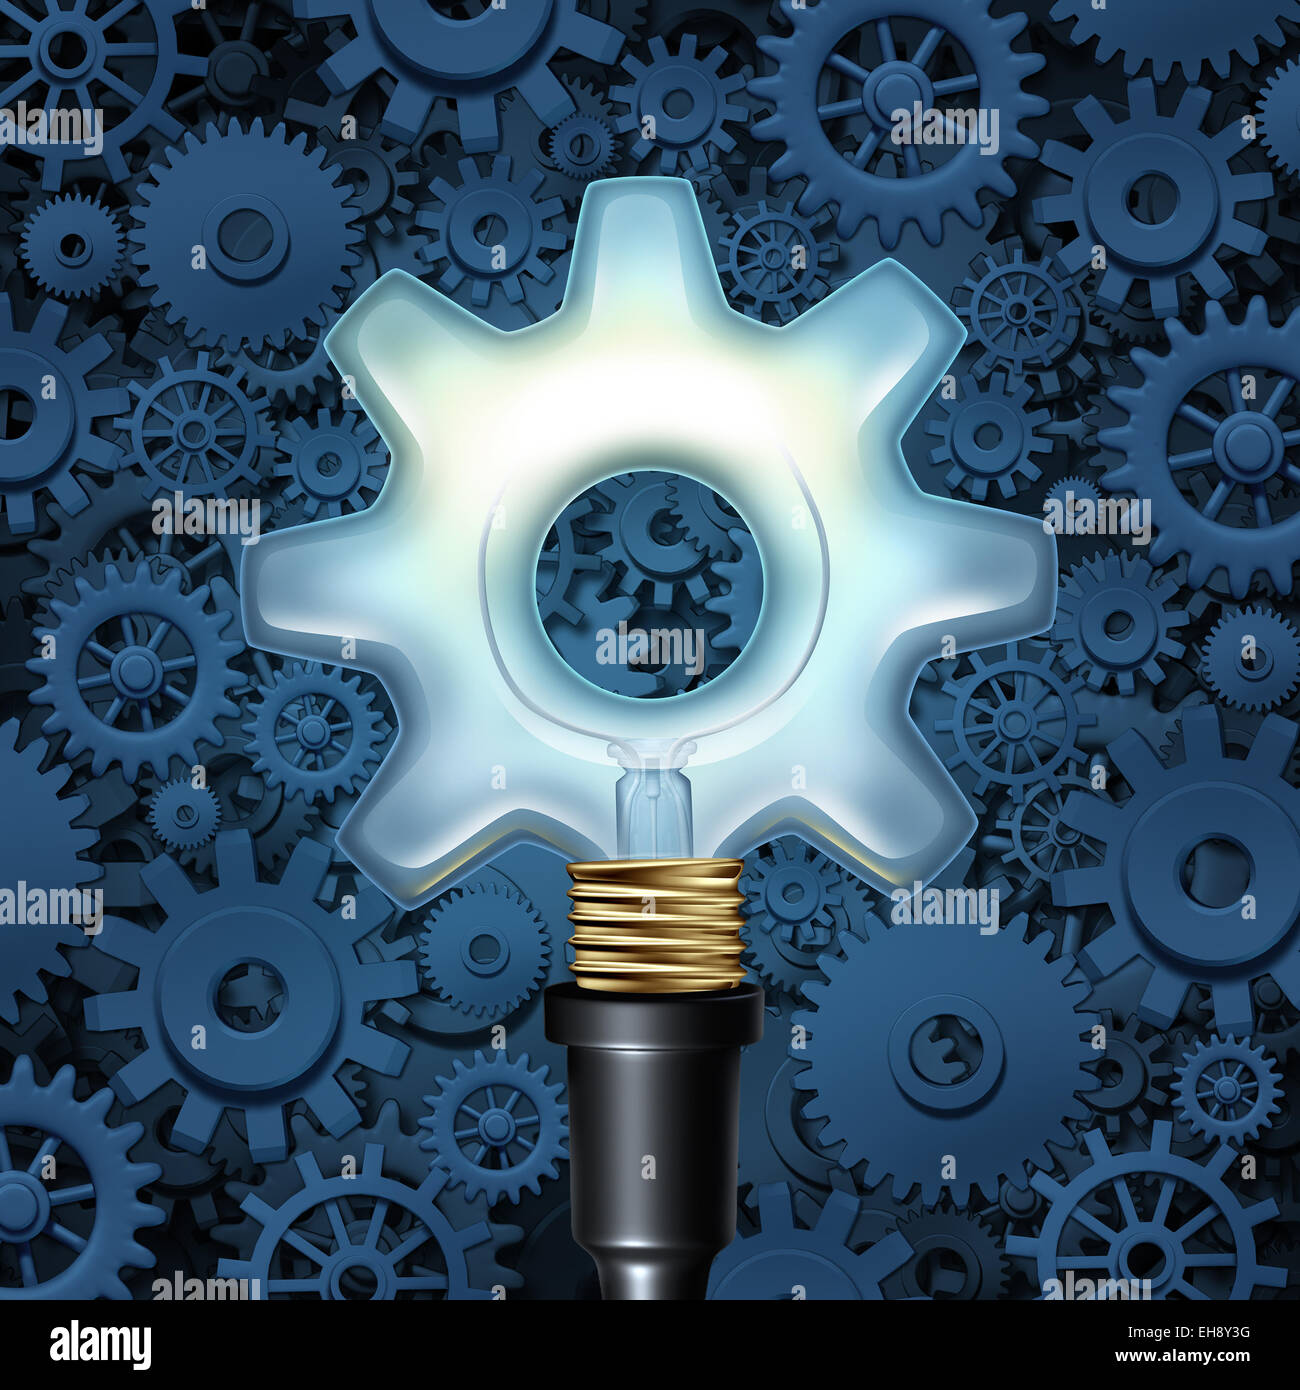 Light bulb with gears business concept as a light shaped as a cog wheel with machine parts in the background as a symbol of industry imagination and innovation. Stock Photo